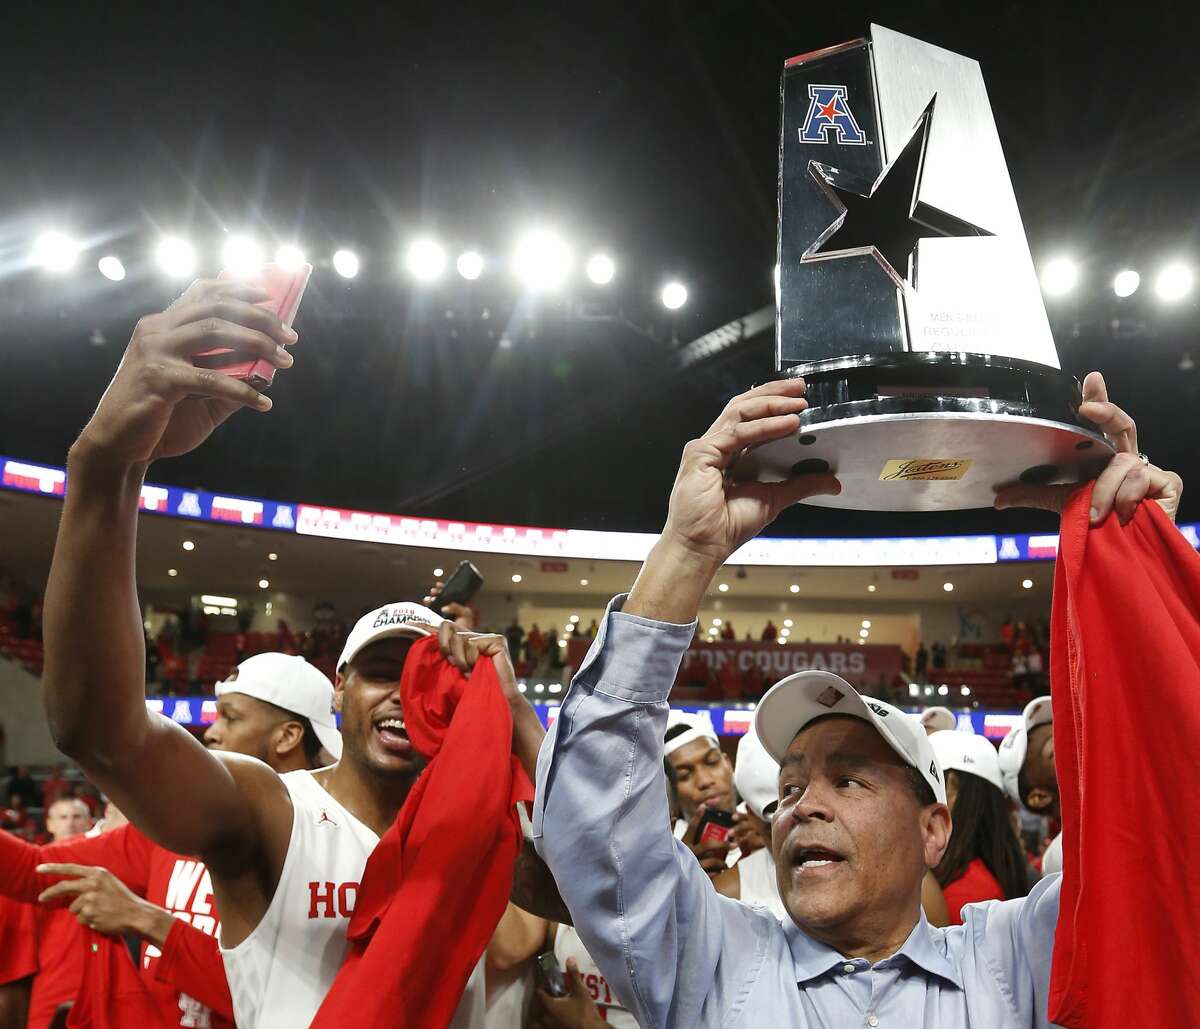 PHOTOS: Local high school players selected in NBA Draft  Houston head coach Kelvin Sampson holds up the American Athletic Conference championship trophy as the Cougars celebrate after beating Southern Methodist 90-79 to win at least a share of the AAC at Fertitta Center on Thursday, March 7, 2019, in Houston. >>>Browse through the photos for a look at the all-time list of every player who played high school basketball in Houston and went on to be selected in the NBA Draft ... 